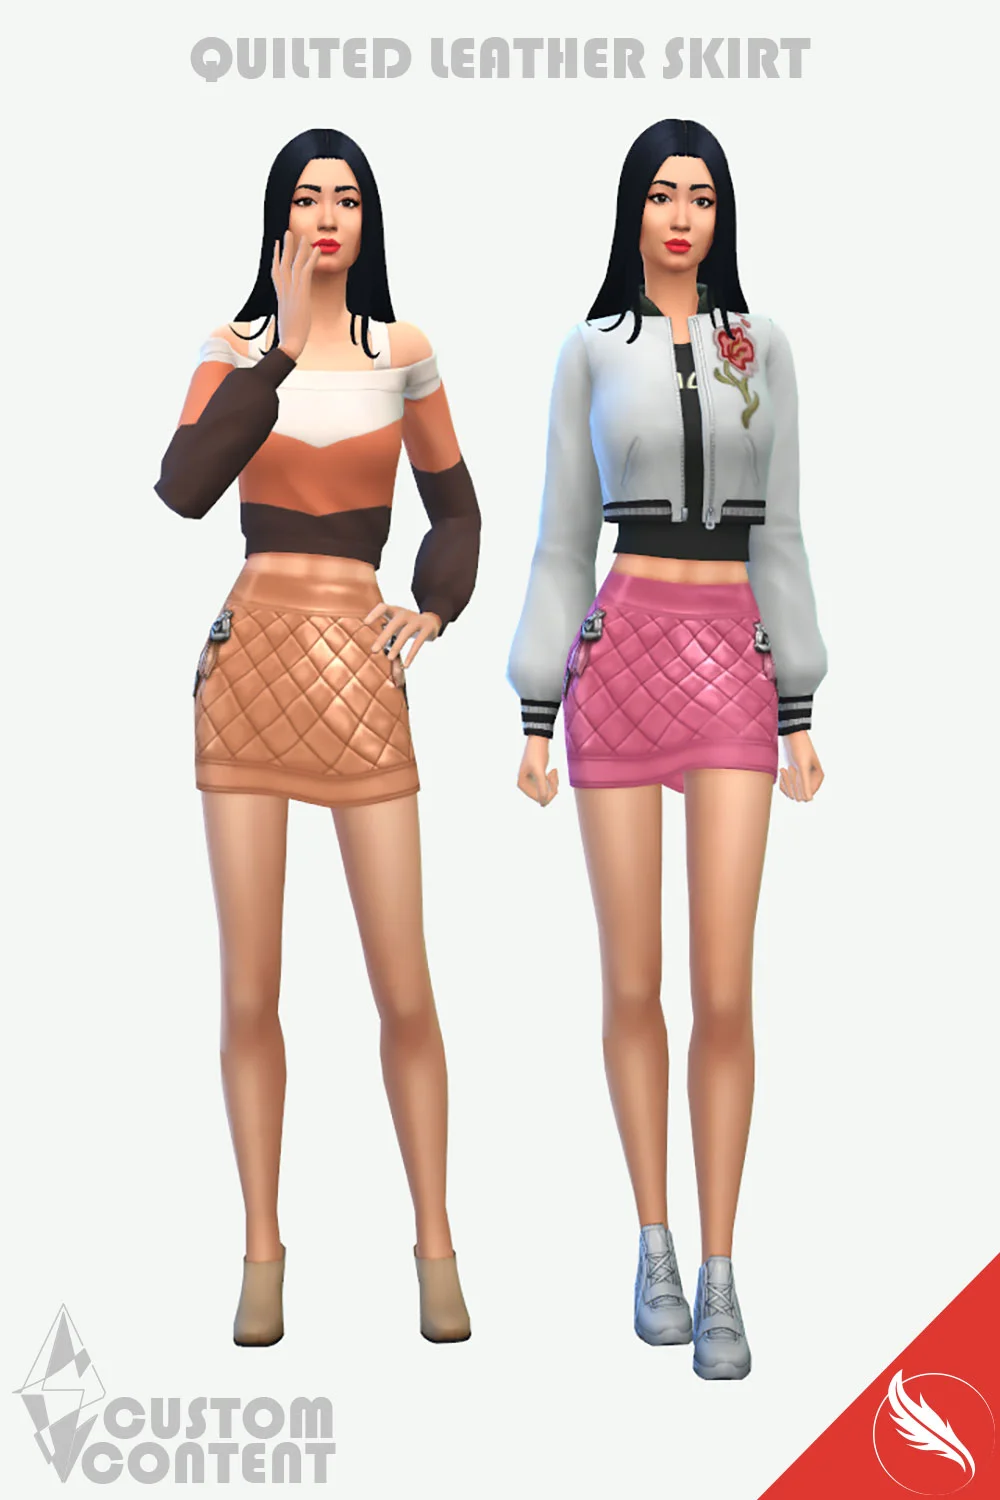 The Sims 4 Quilted Leather Skirt